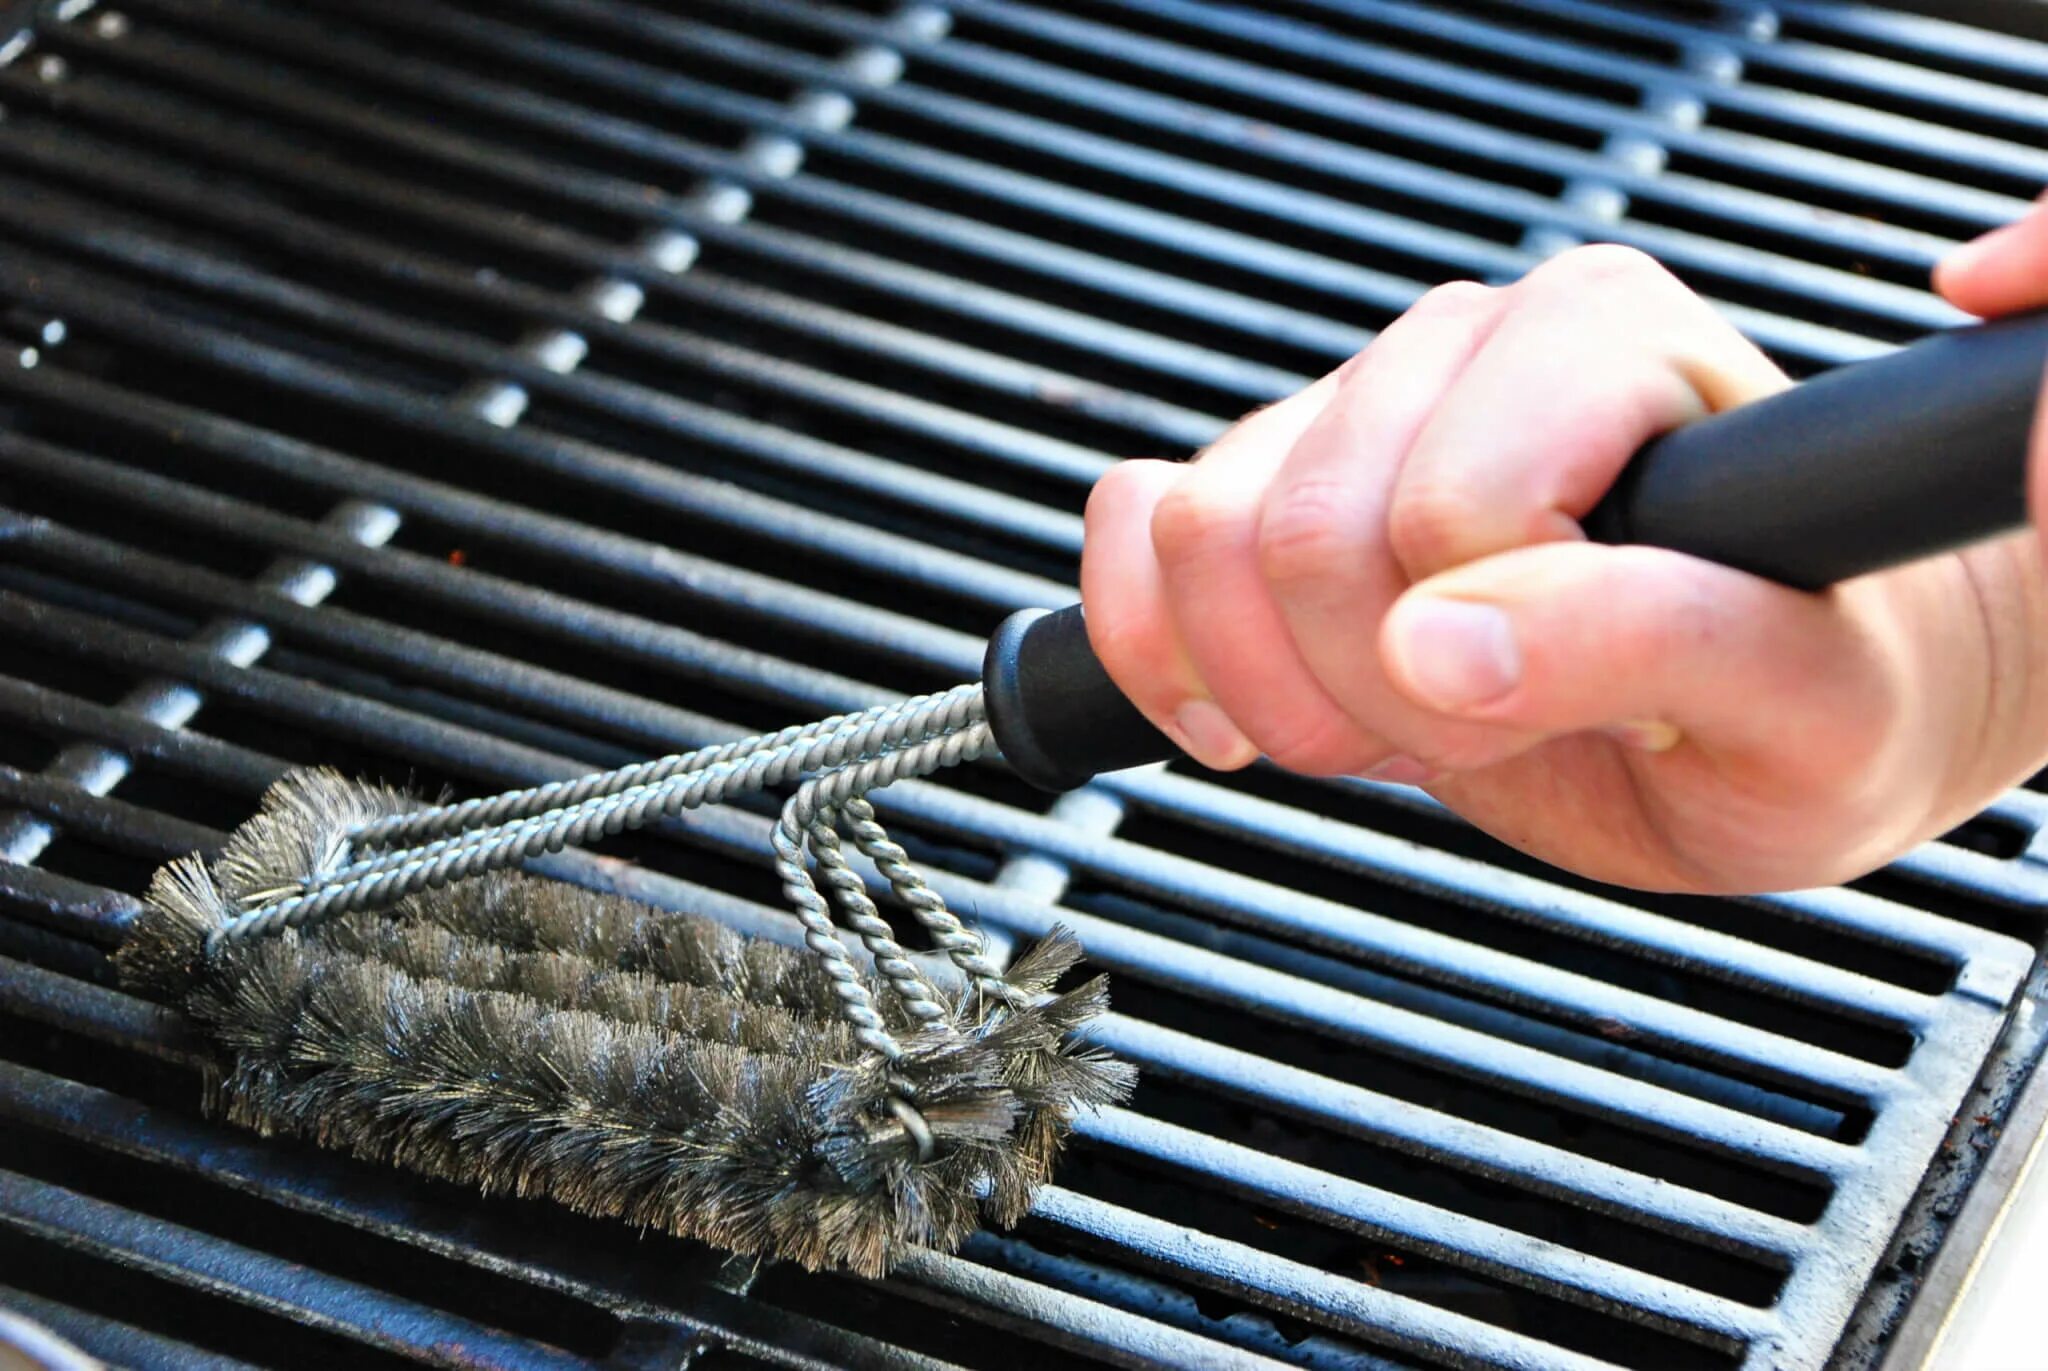 Grill Brush clean. Грязная решетка гриль. Cleaning a Grill Brush. How to clean a Grill Brush. Как быстро отмыть решетку